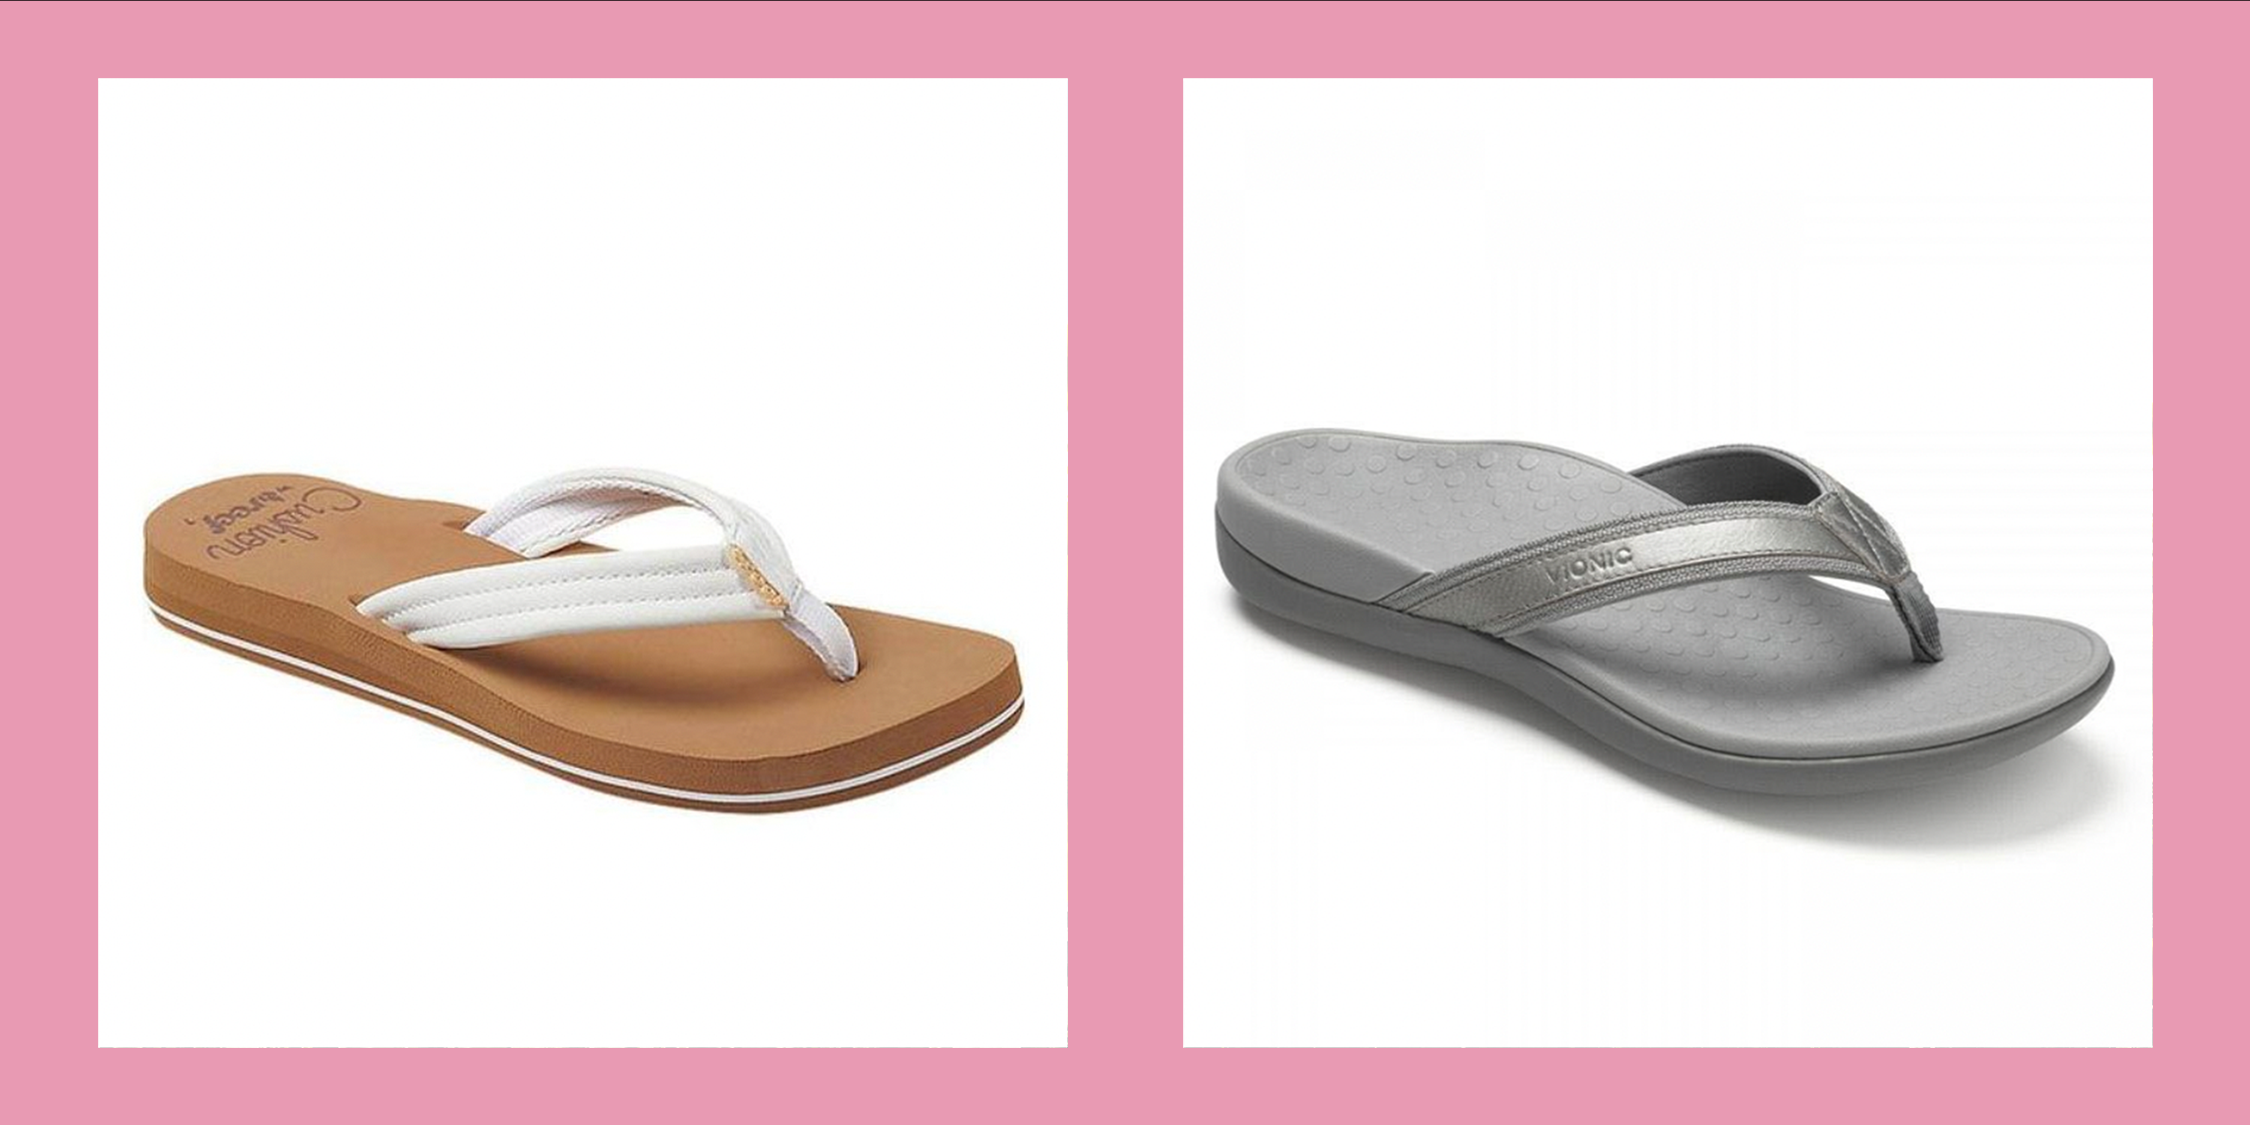 The Most Comfortable Flip-Flops That Won't Hurt Your Feet